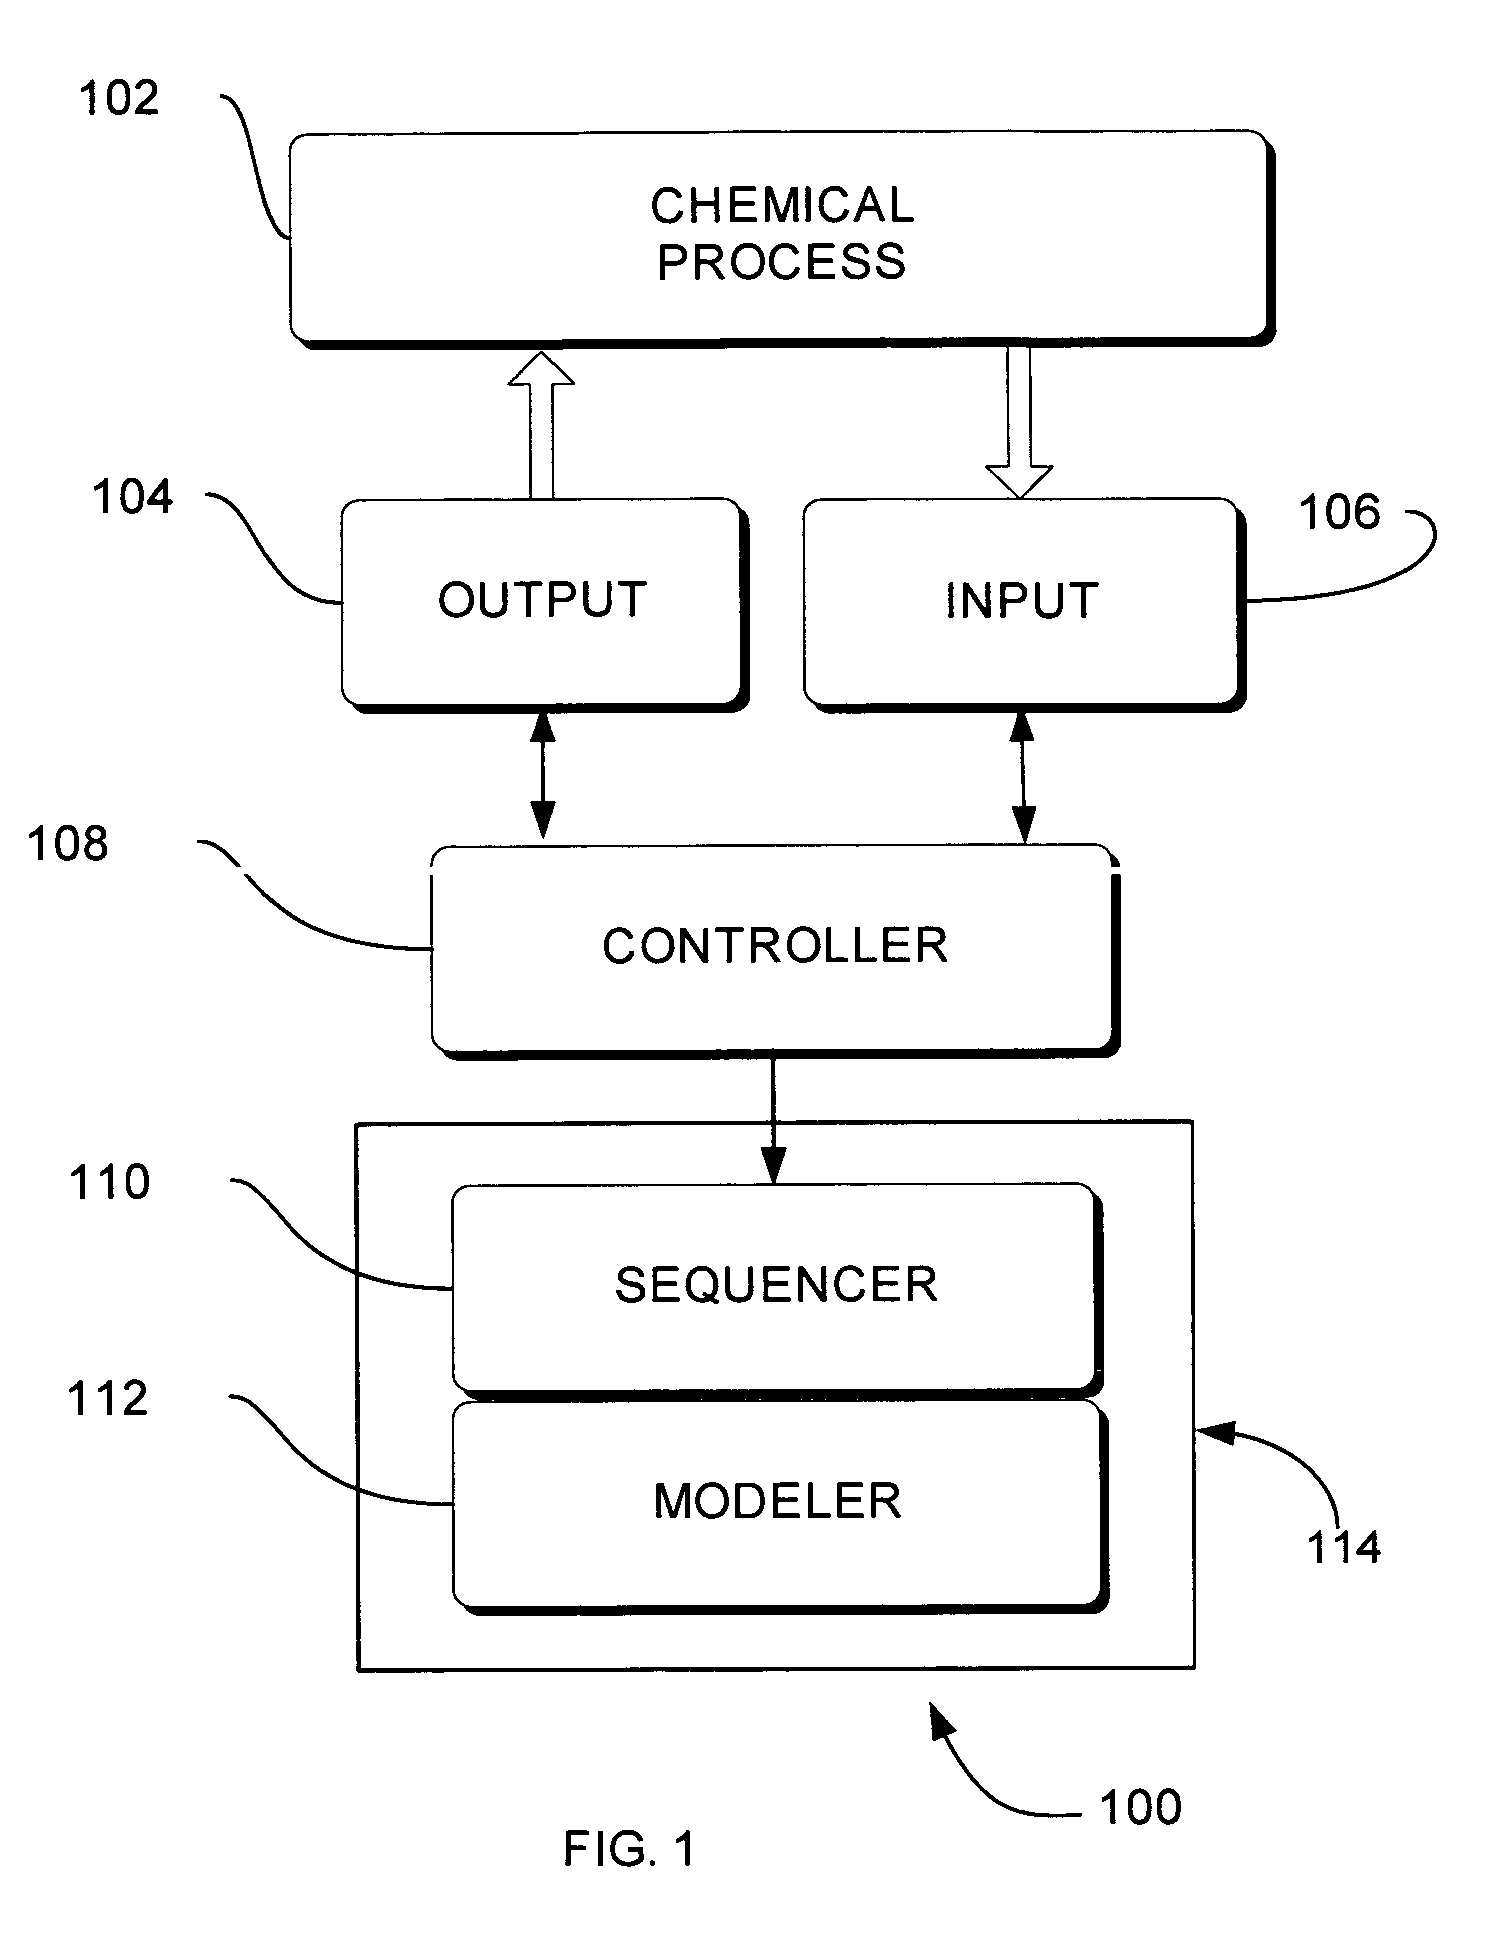 Systems, methods and apparatus for determining physical properties of fluids